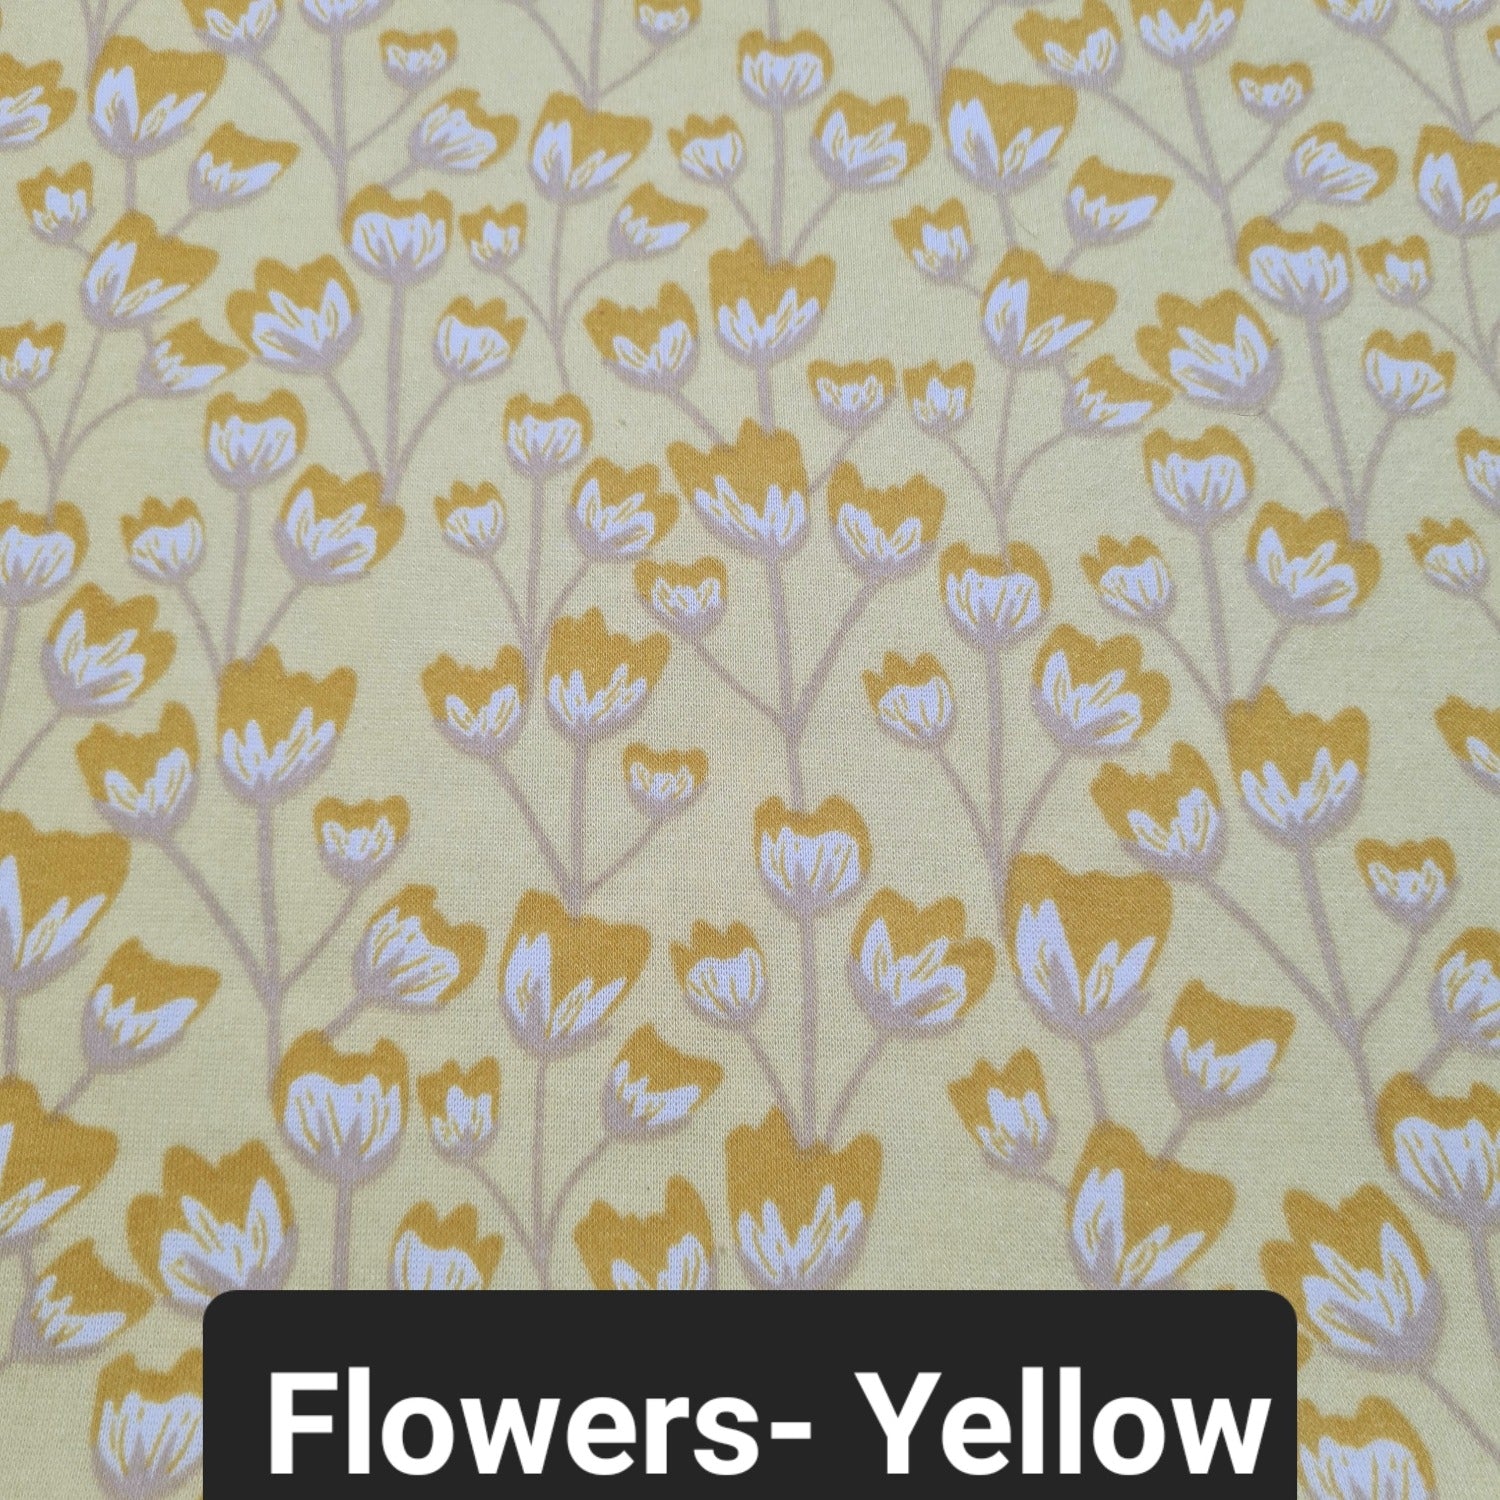 Pastel yellow tracksuit fleece fabric with yellow flowers